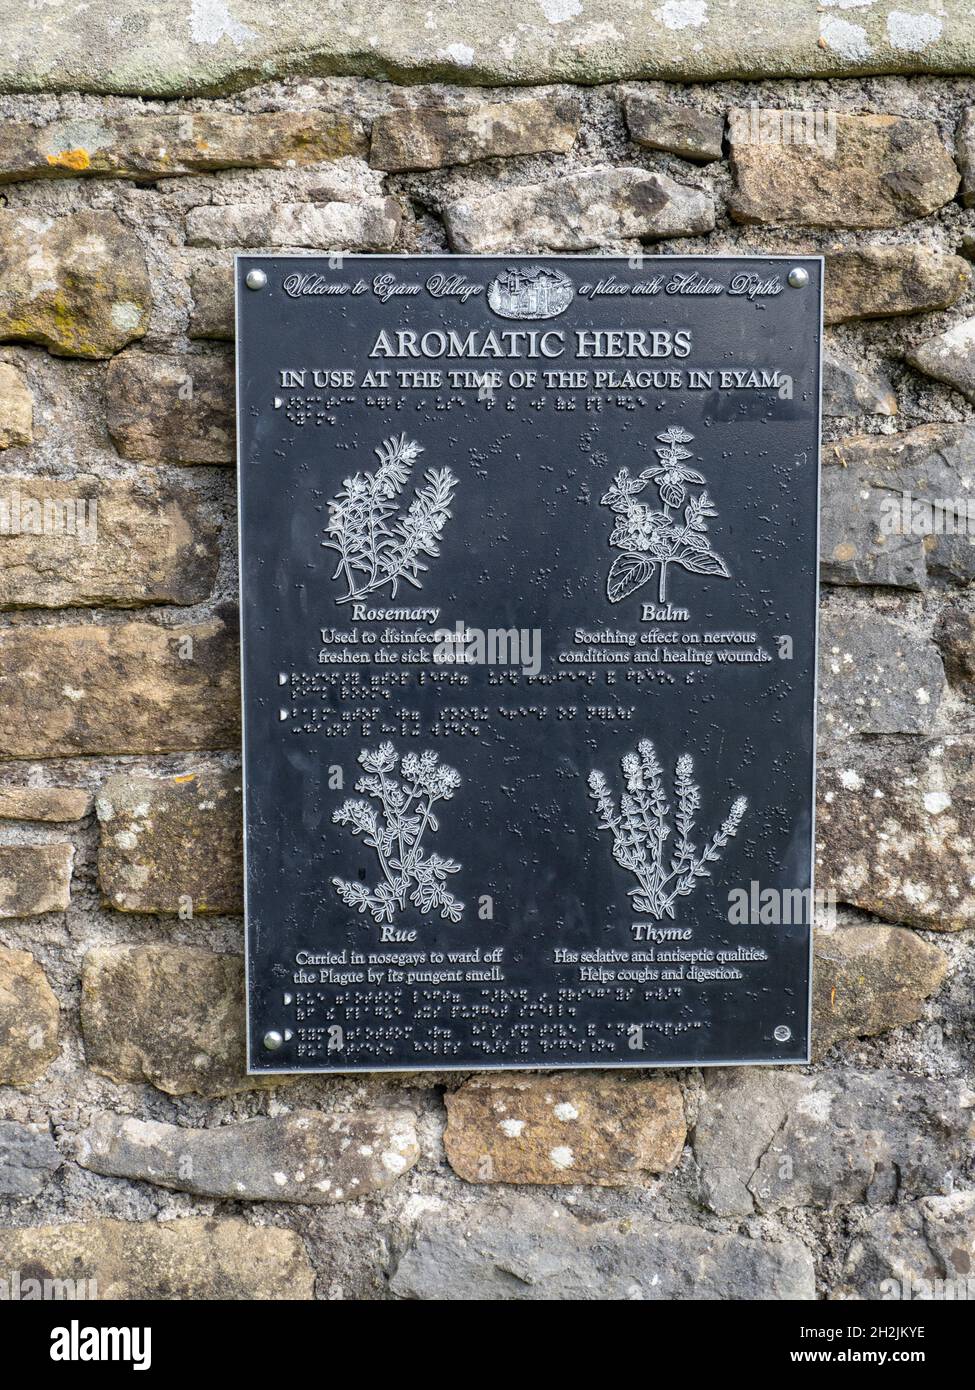 Metal sign indicating the herbs that were grown at the time of the 17th century plague in the village of Eyam, Derbyshire, UK Stock Photo